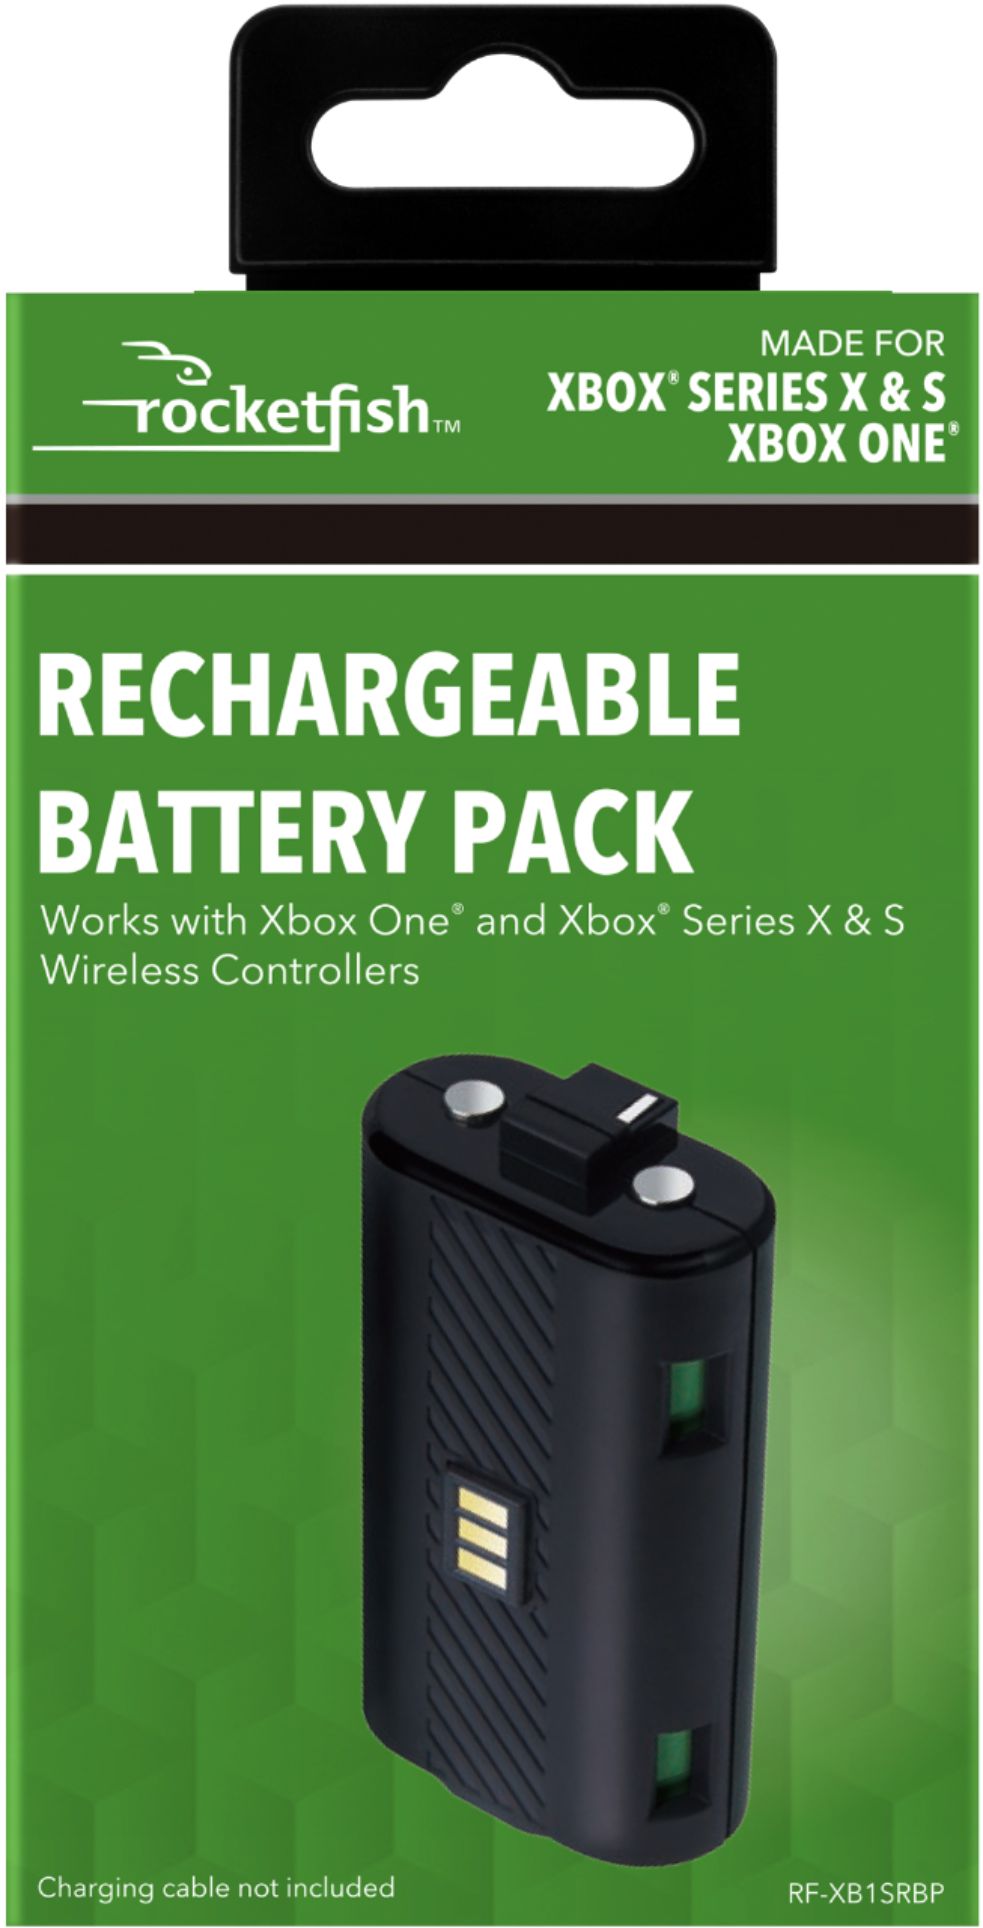 Rechargeable Battery Pack For Xbox 